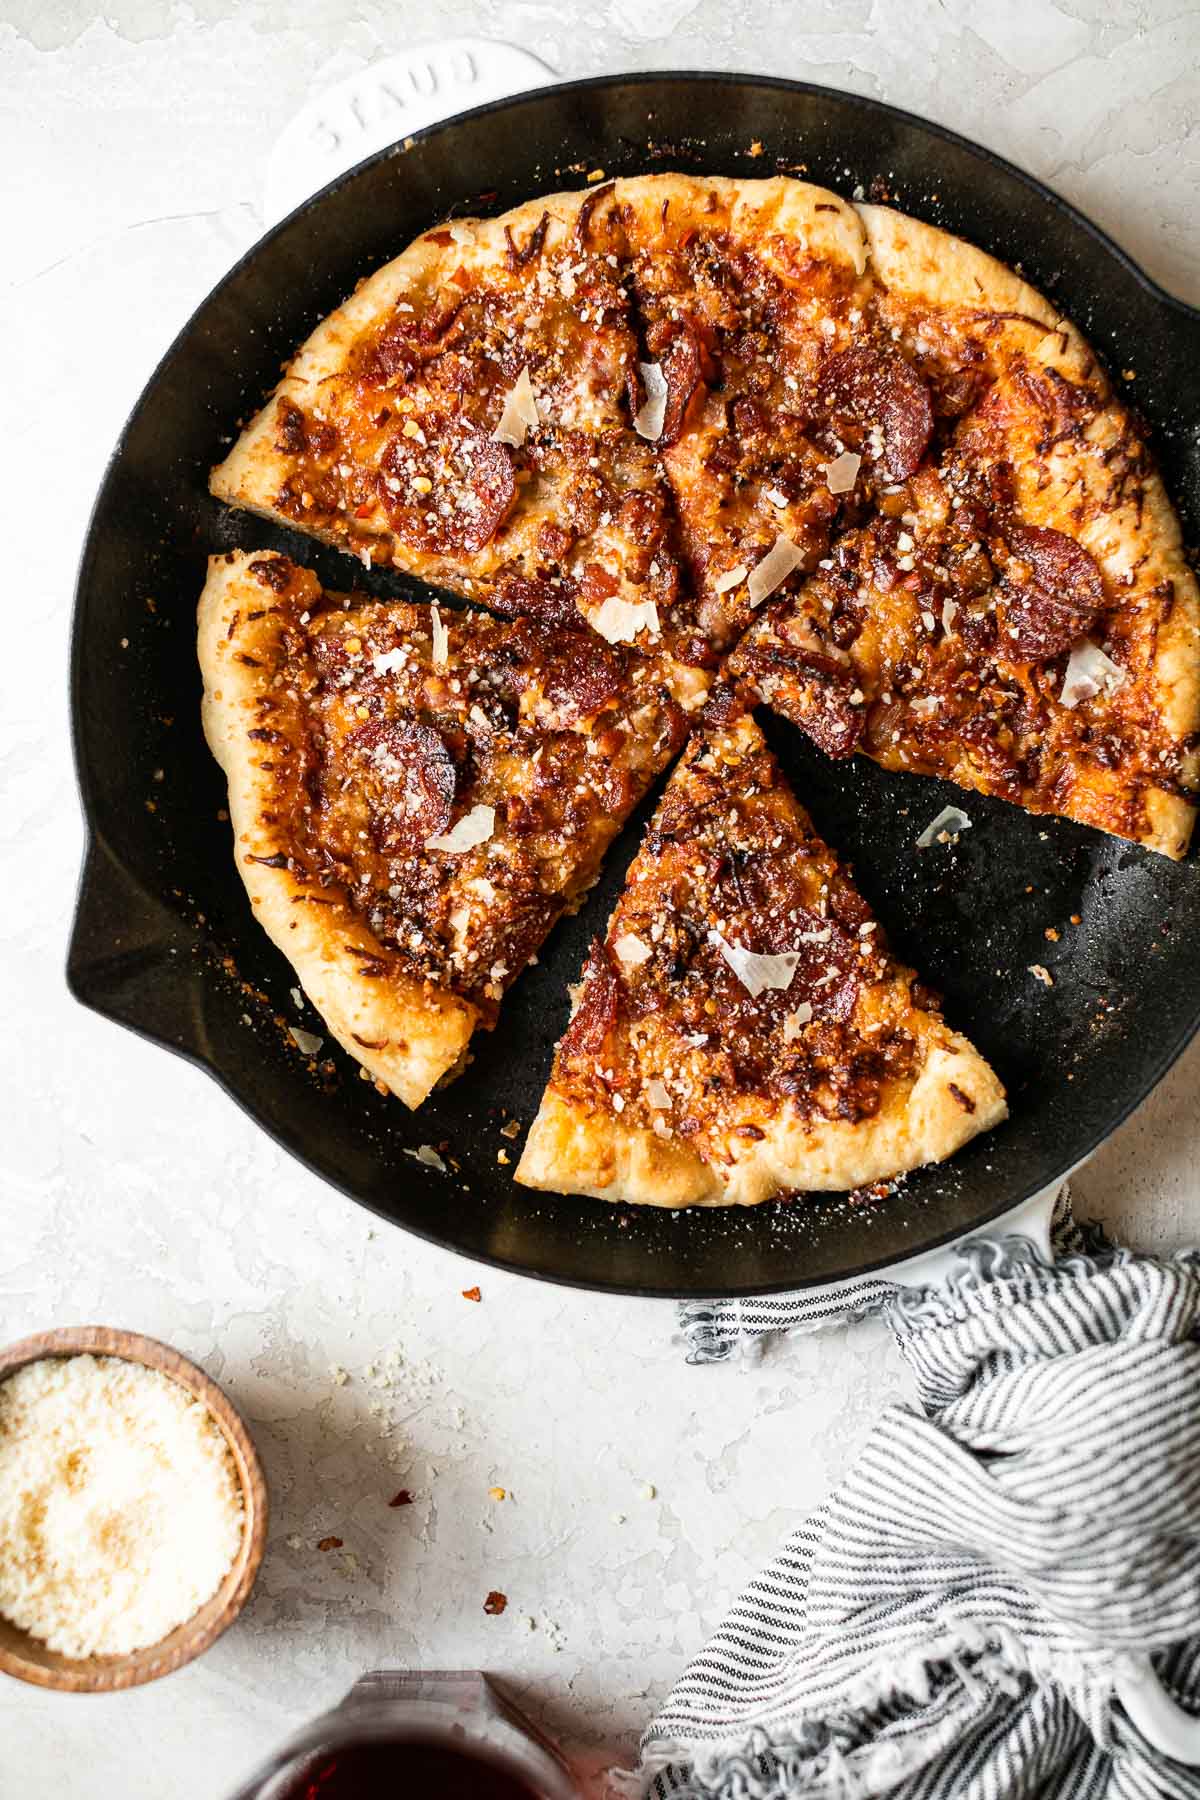 4 Tips for Turning a Cast-Iron Skillet into a Pizza Stone